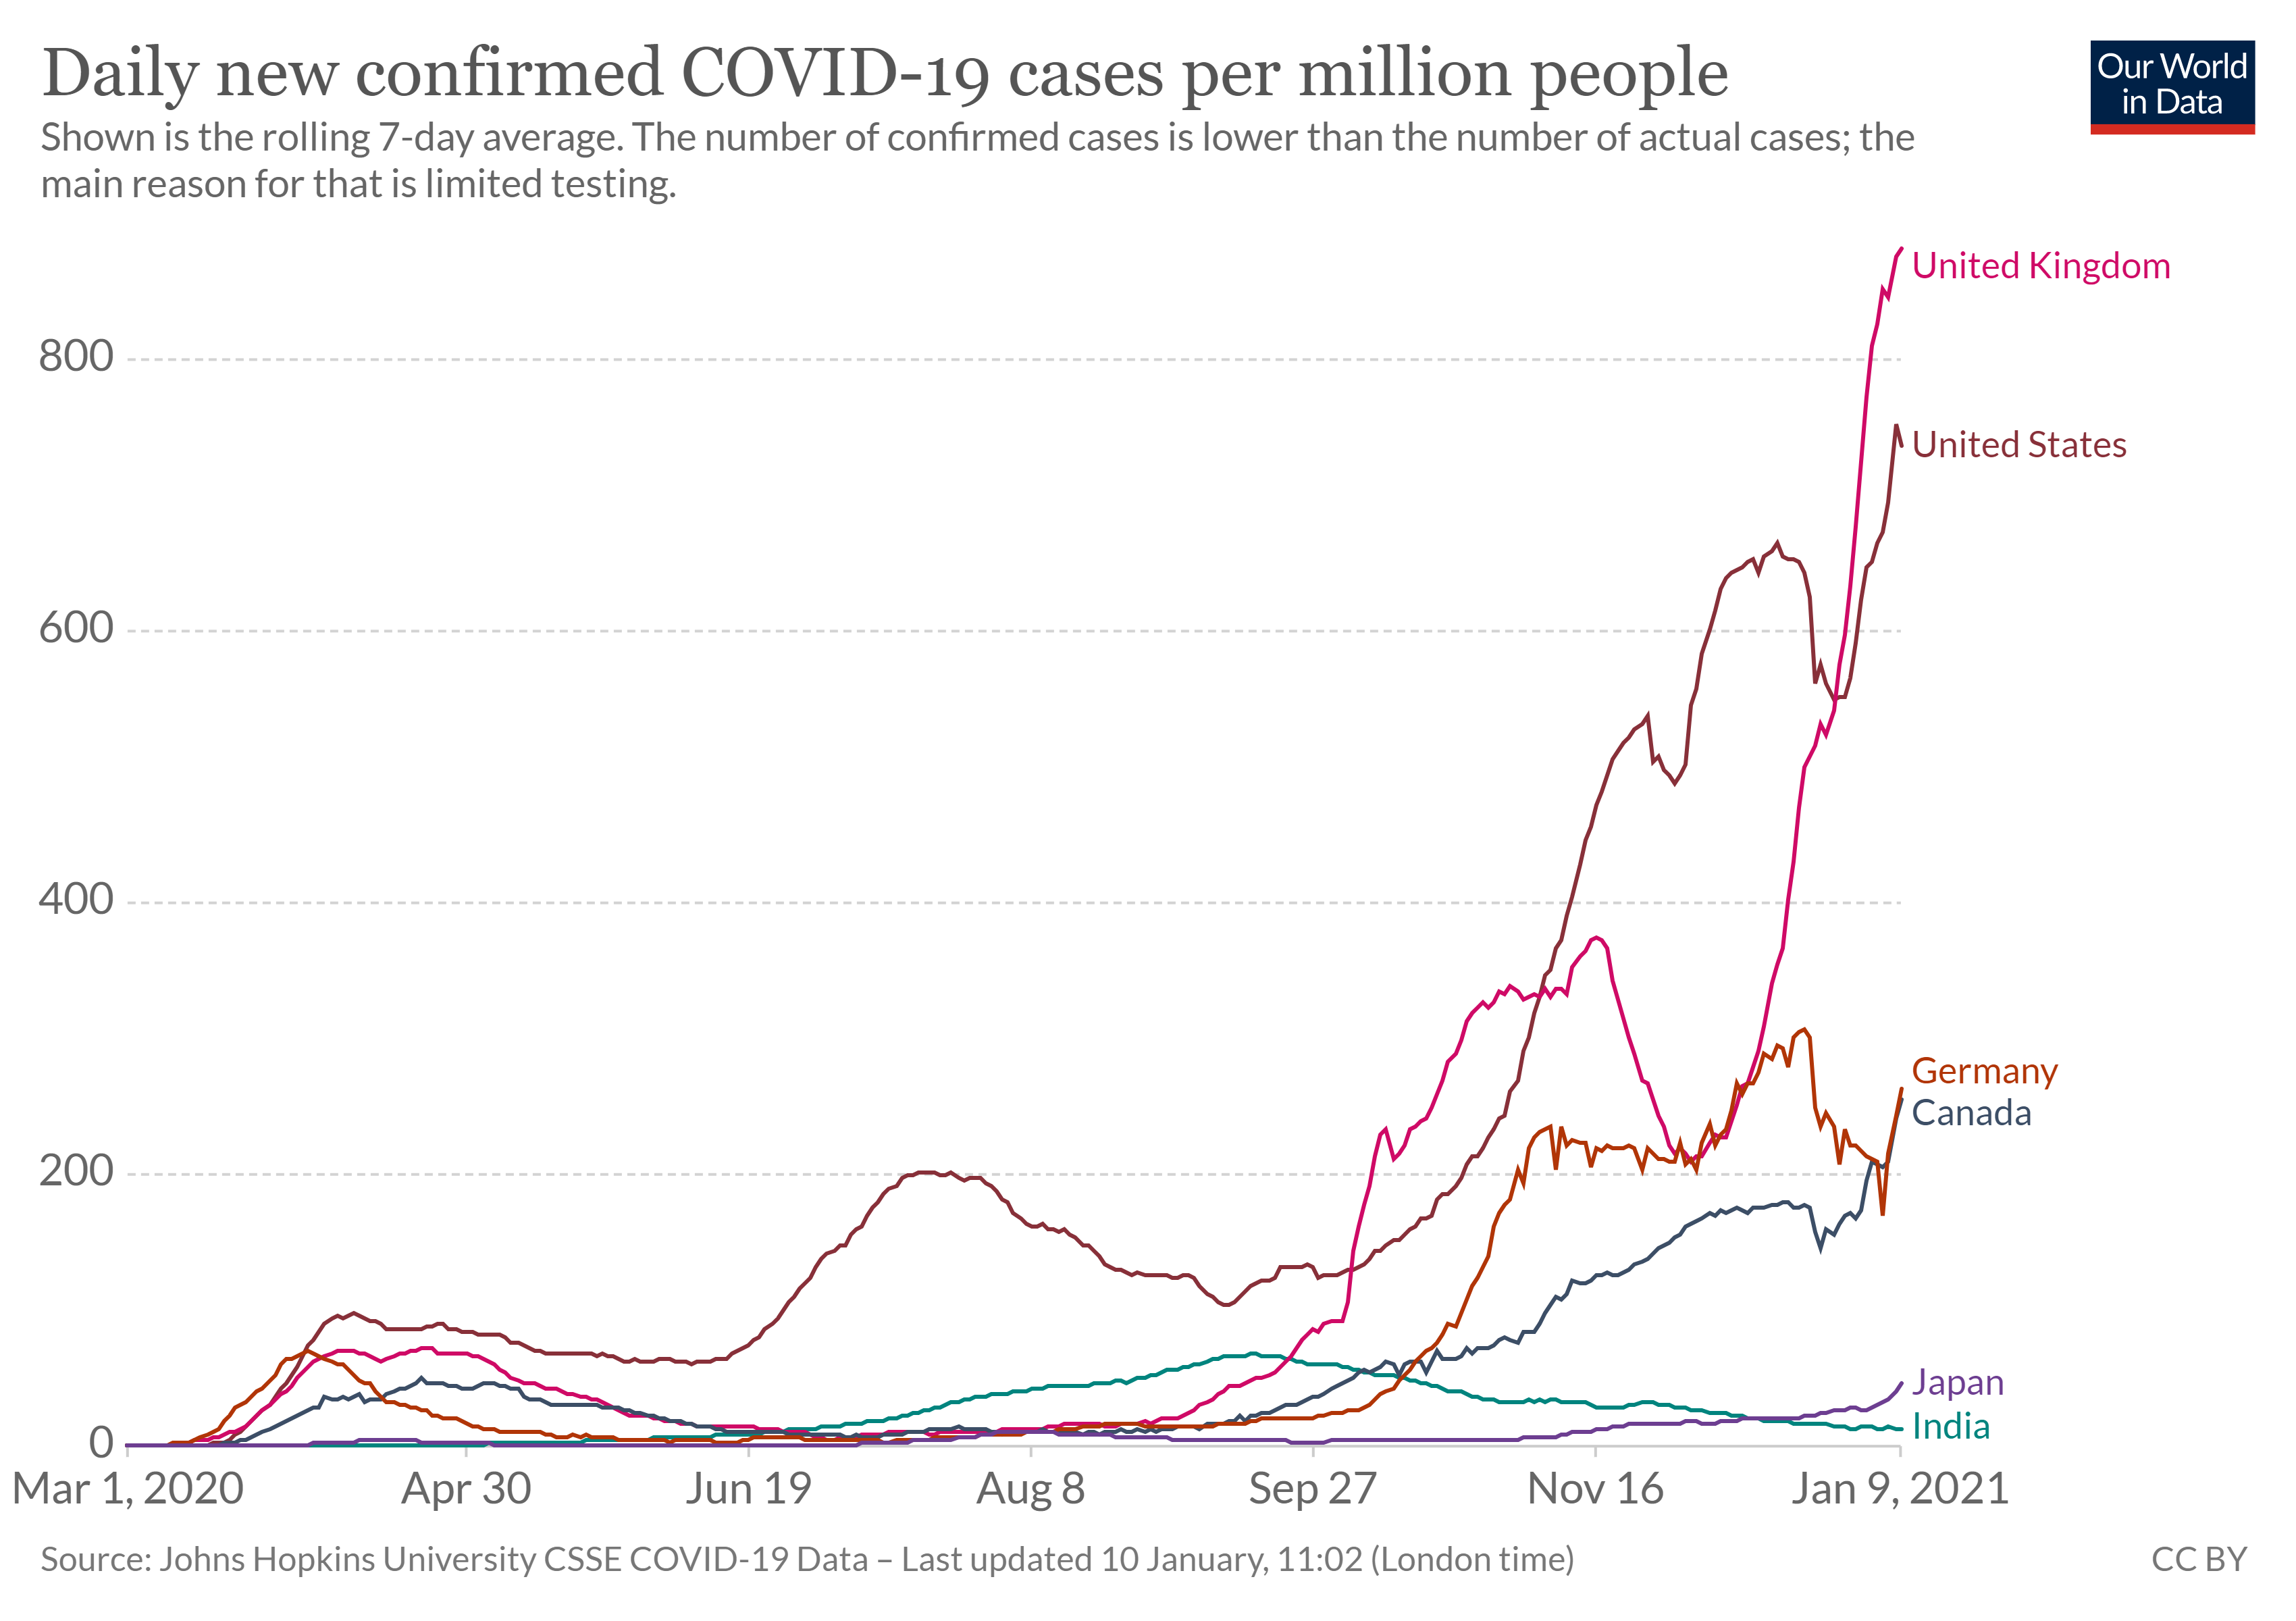 New COVID-19 cases per million people over time in the U.S., U.K., Italy, Germany, Canada, Japan, and India. Most show steep increases, with the highest rates in the U.K.